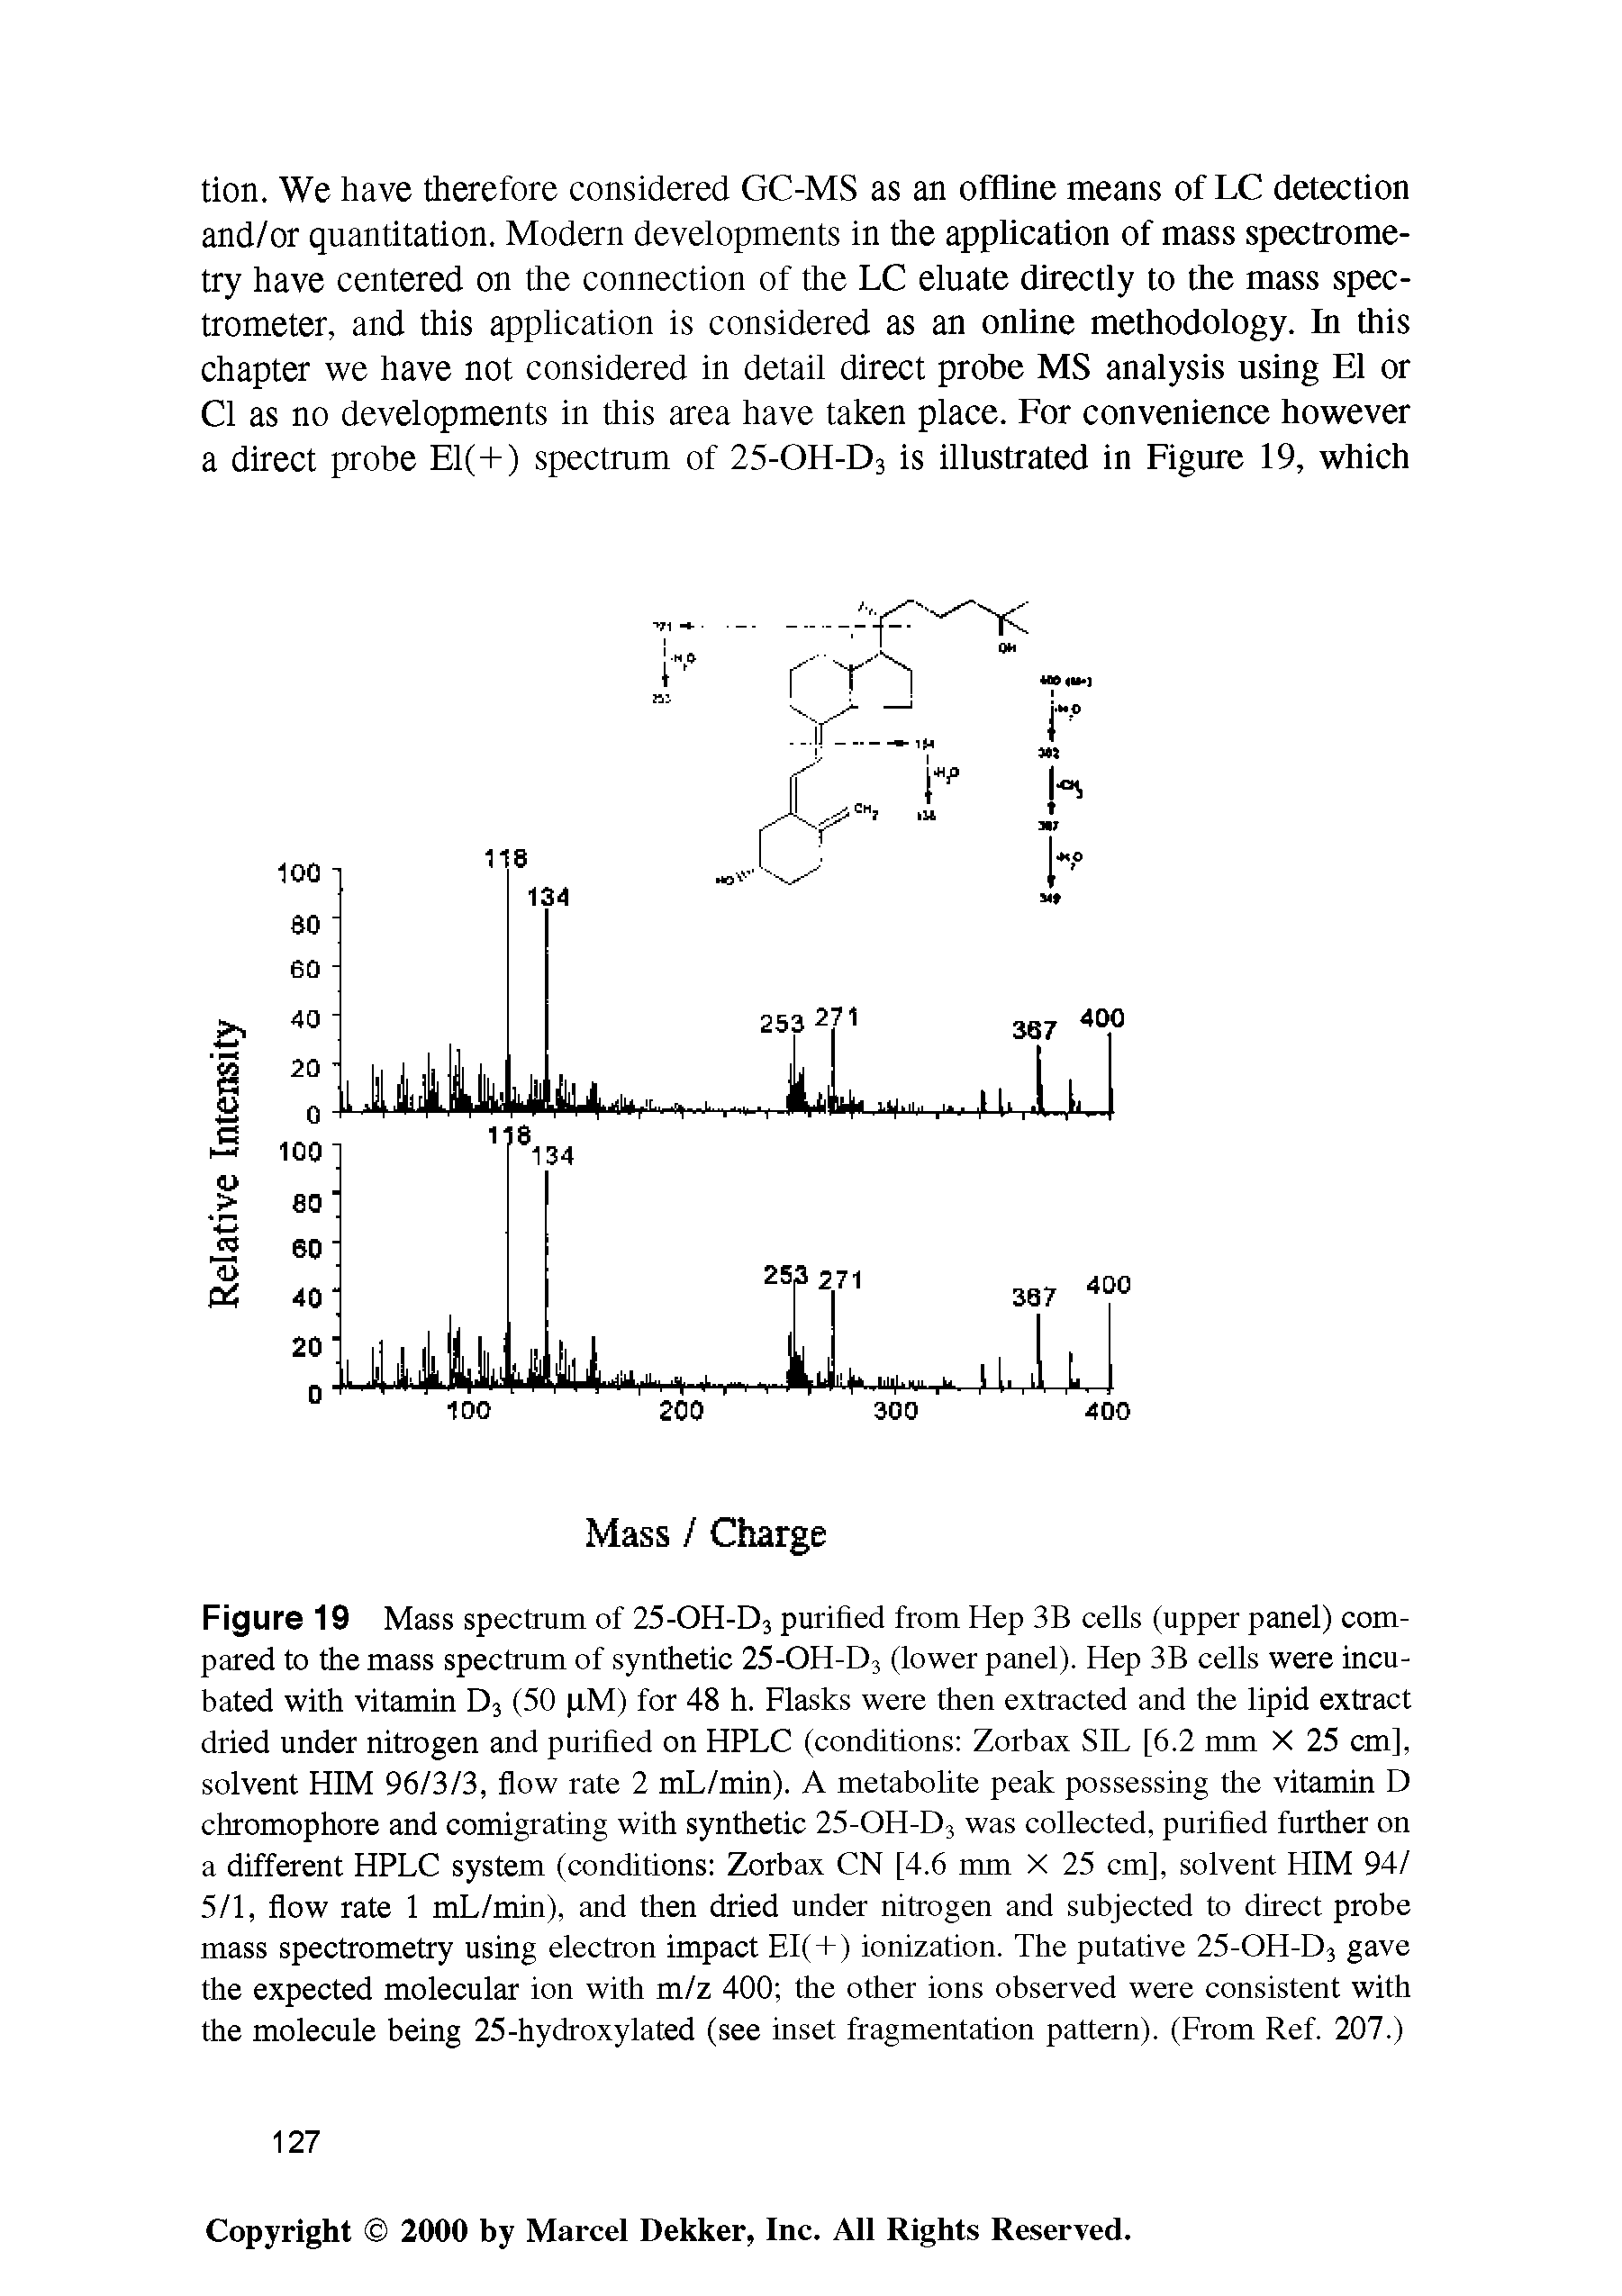 Figure 19 Mass spectrum of 25-OH-D3 purified from Hep 3B cells (upper panel) compared to the mass spectrum of synthetic 25-OH-D3 (lower panel). Hep 3B cells were incubated with vitamin D3 (50 pM) for 48 h. Flasks were then extracted and the lipid extract dried under nitrogen and purified on HPLC (conditions Zorbax SIL [6.2 mm X 25 cm], solvent HIM 96/3/3, flow rate 2 mL/min). A metabolite peak possessing the vitamin D chromophore and comigrating with synthetic 25-OH-D3 was collected, purified further on a different HPLC system (conditions Zorbax CN [4.6 mm X 25 cm], solvent HIM 94/ 5/1, flow rate 1 mL/min), and then dried under nitrogen and subjected to direct probe mass spectrometry using electron impact EI(+) ionization. The putative 25-OH-D3 gave the expected molecular ion with m/z 400 the other ions observed were consistent with the molecule being 25-hydroxylated (see inset fragmentation pattern). (From Ref. 207.)...